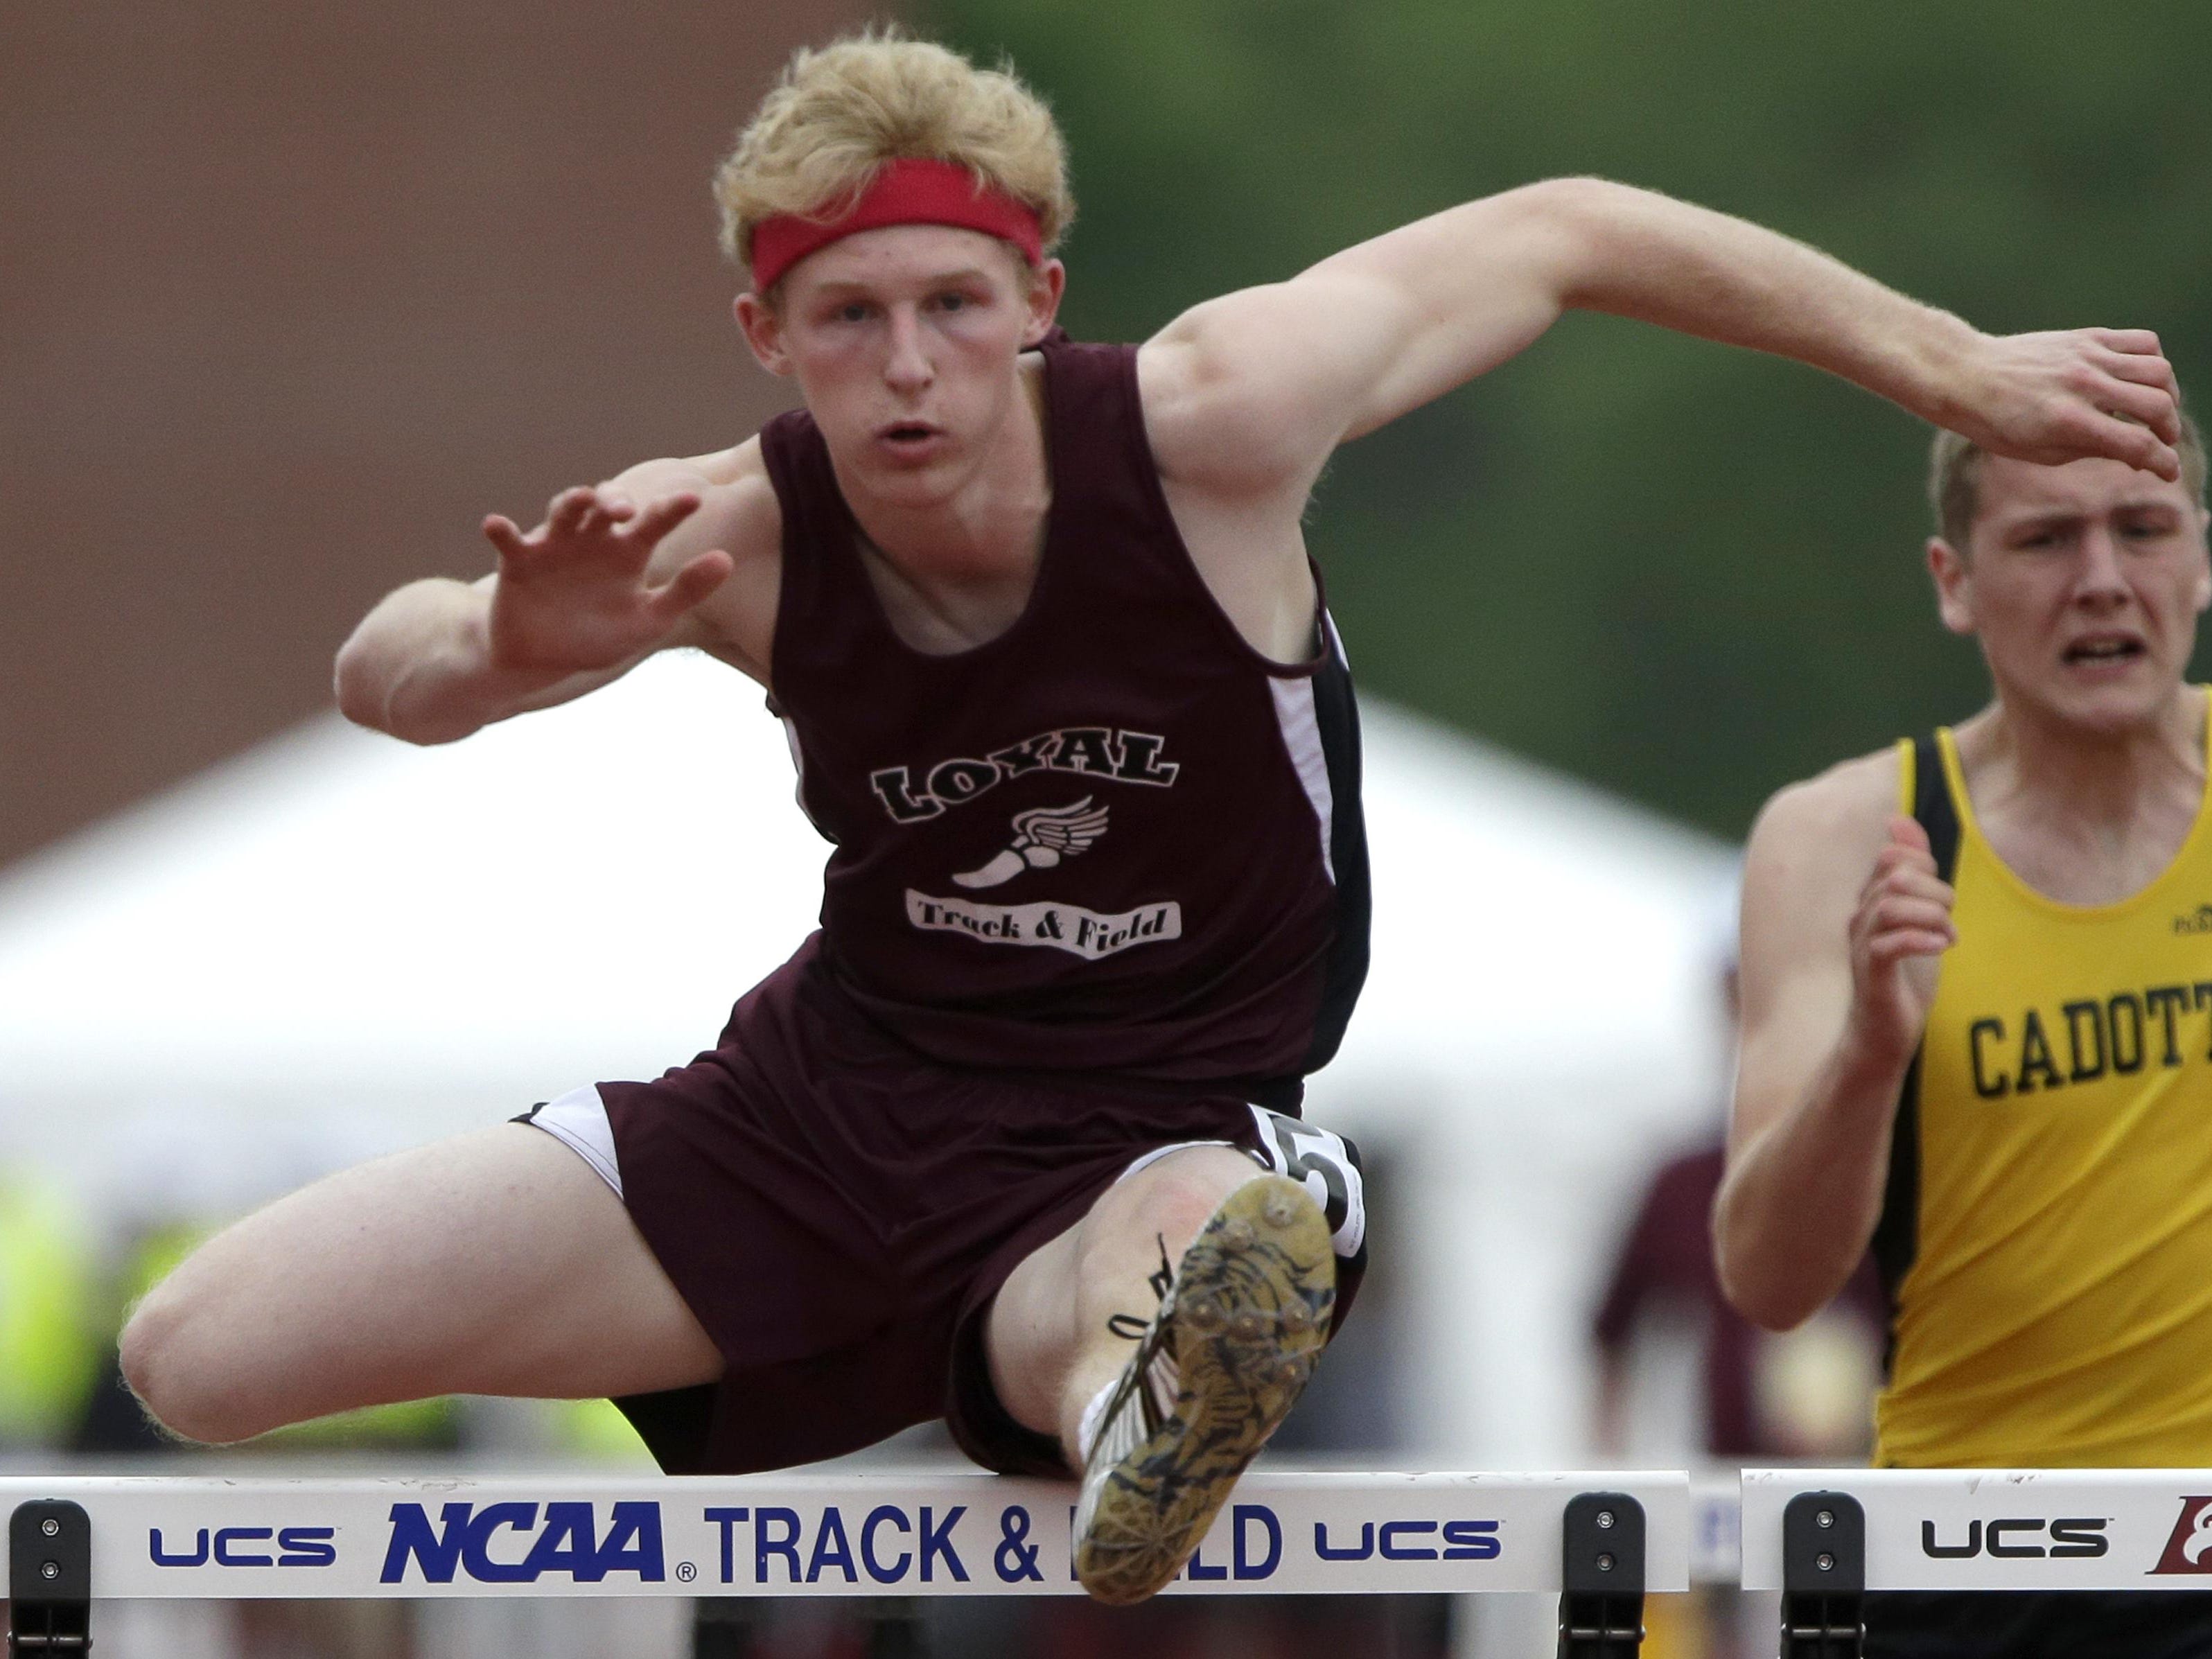 Loyal senior Malm glides over a hurdle during the Division 3 110 hurdles during the WIAA state track meet Satruday. Malm won the 110s and 300s.